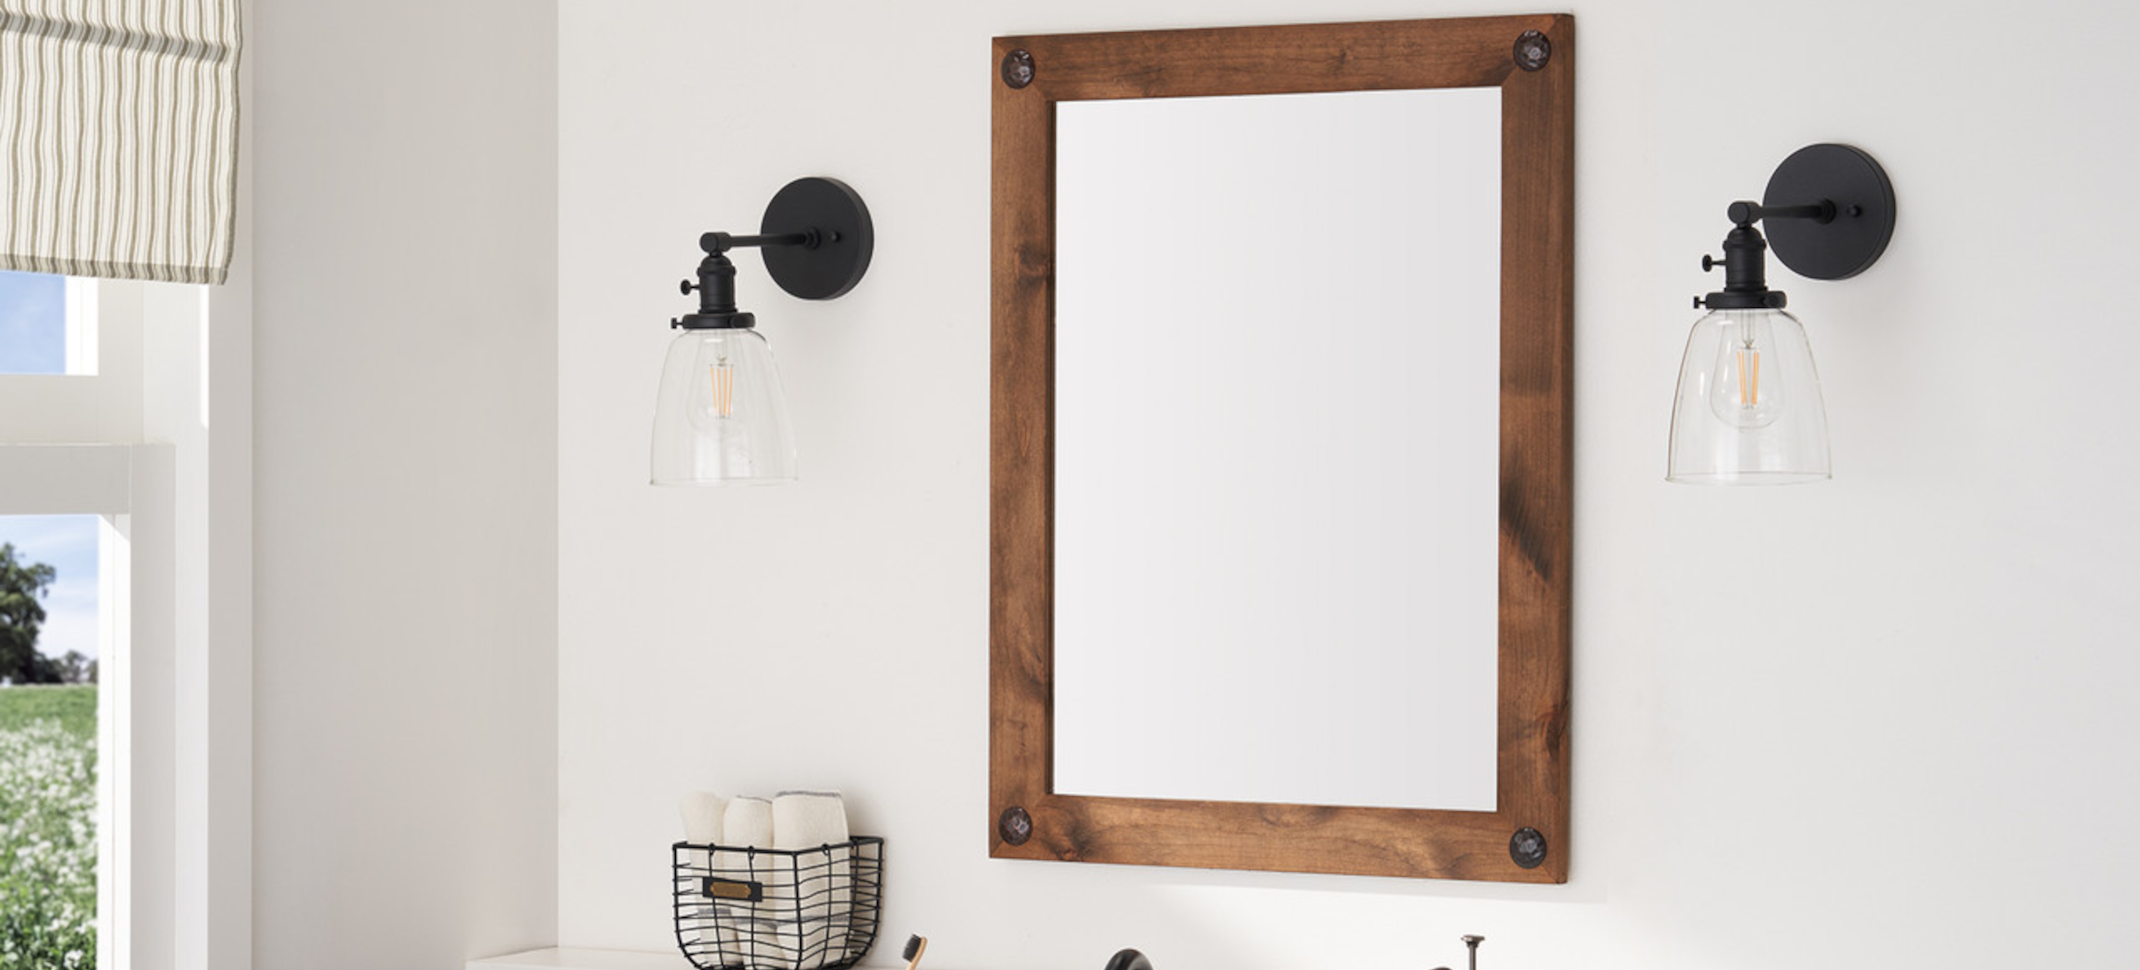 Plumbing Deals - Mirrors and Medicine Cabinets